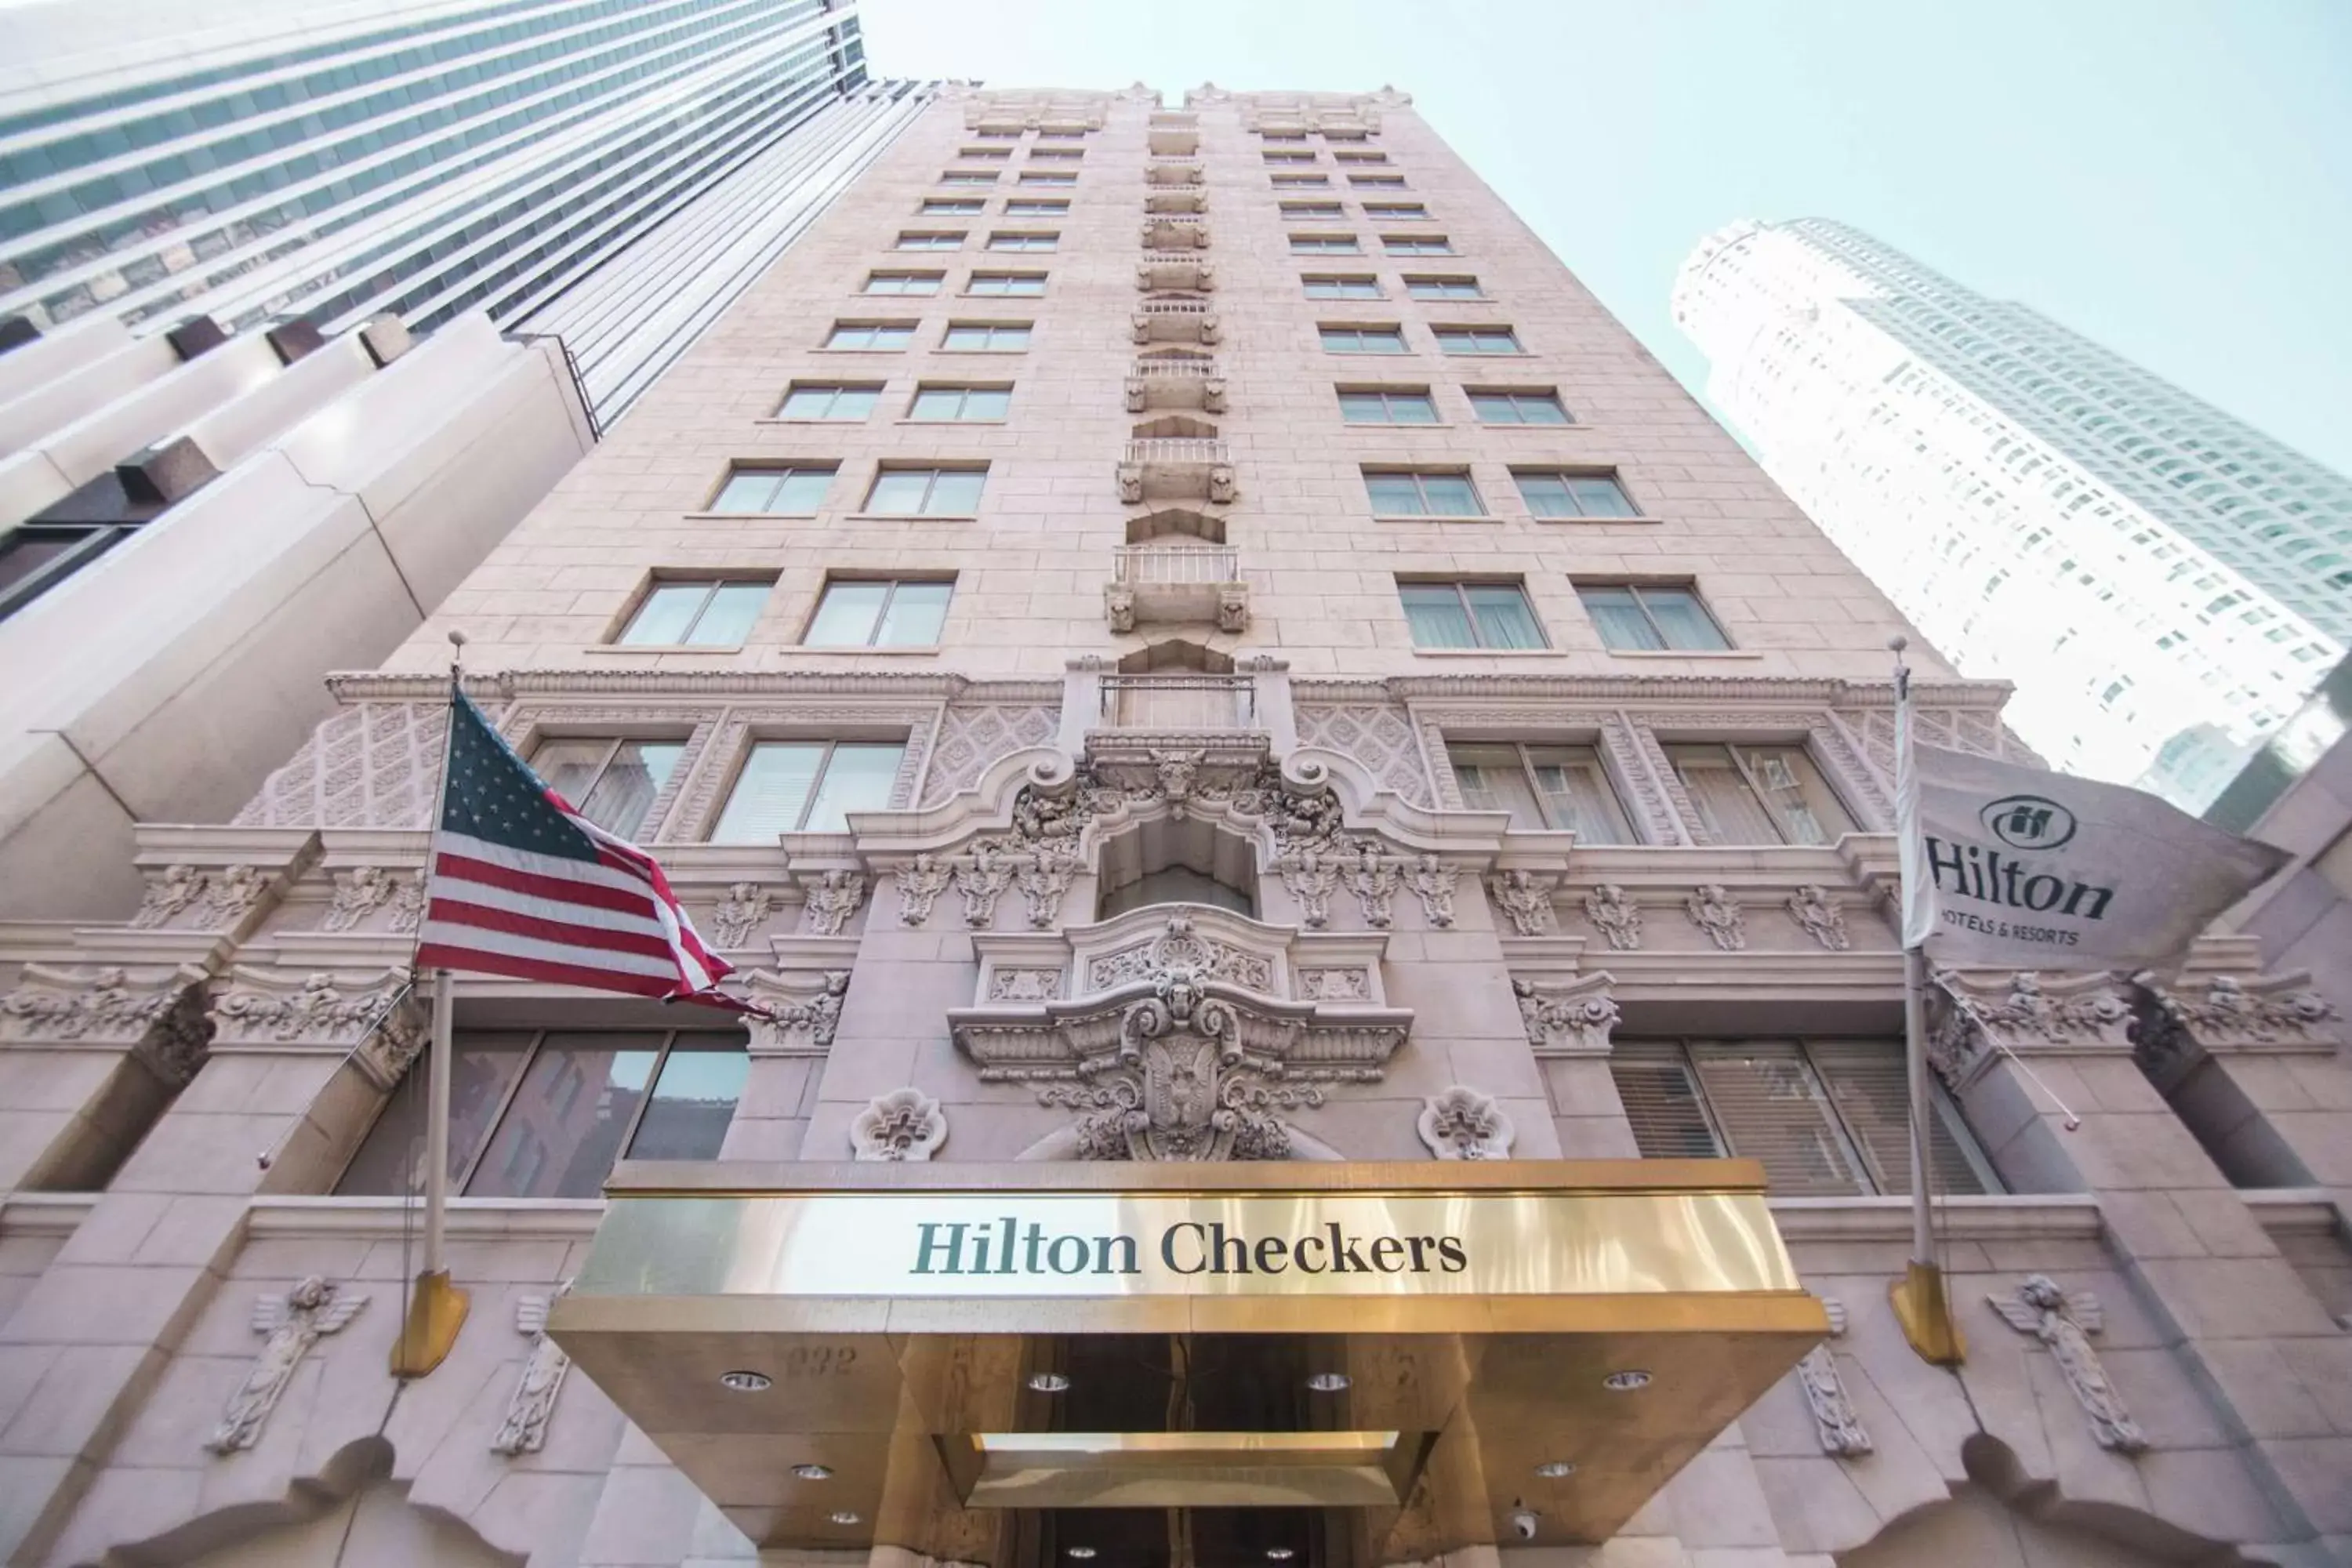 Property Building in Hilton Checkers Los Angeles